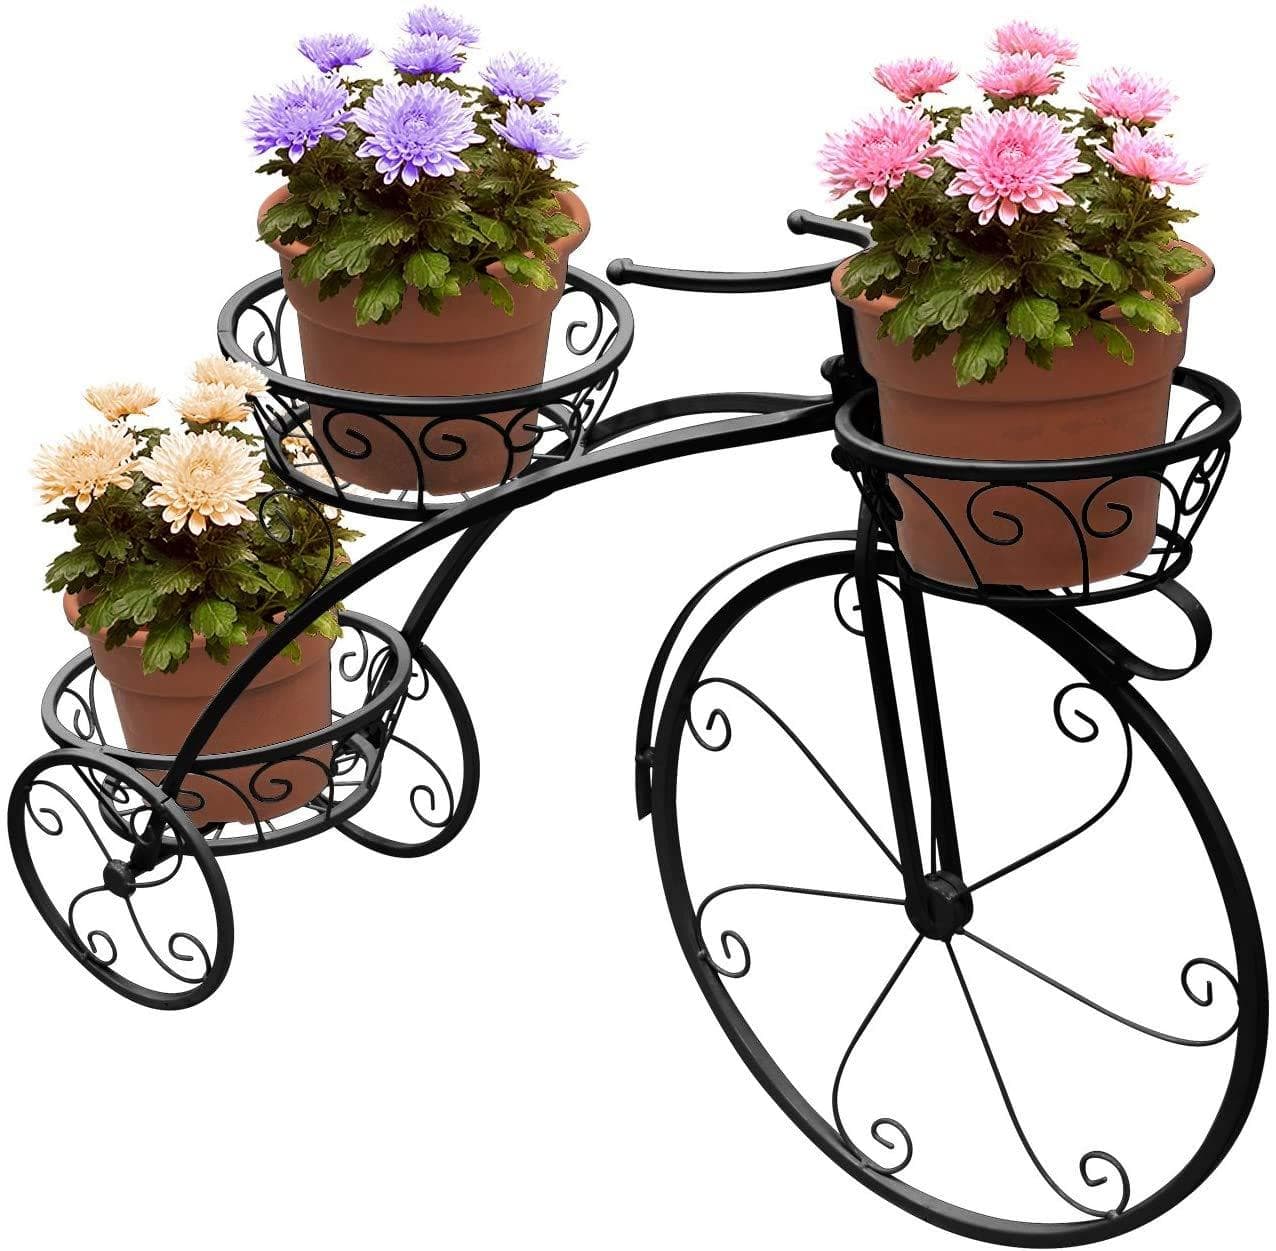 3-Tier Garden Cart Planter Stand Tricycle Plant Holder